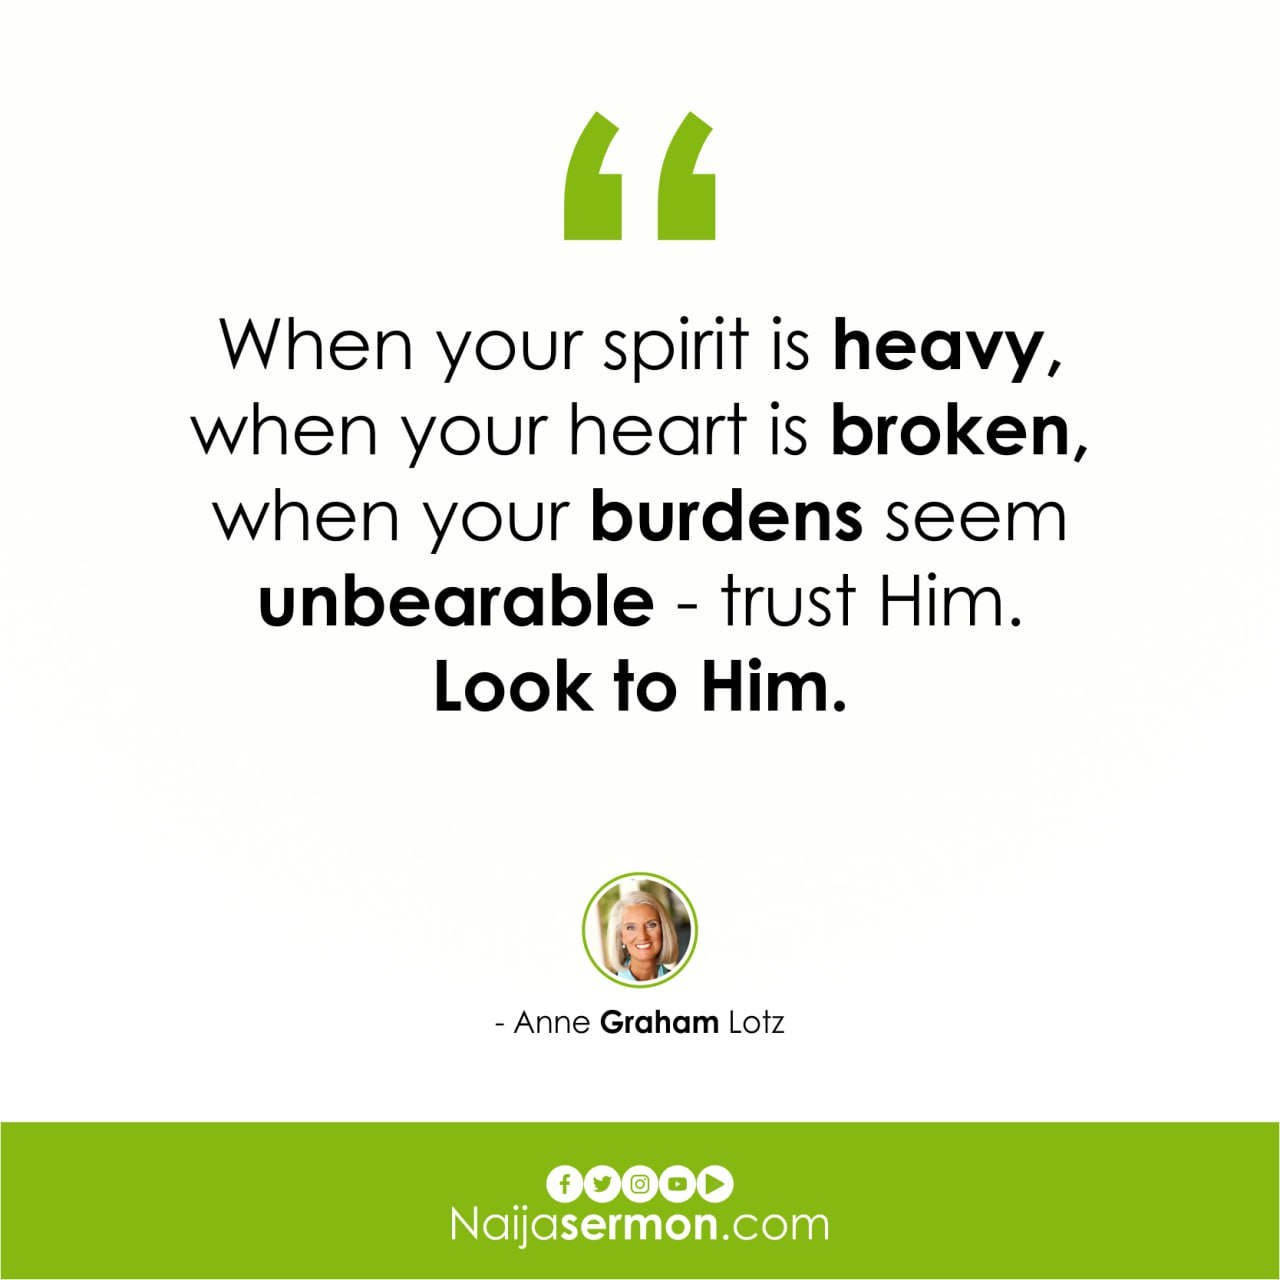 QUOTE OF THE DAY BY ANNE GRAHAM LOTZ 17